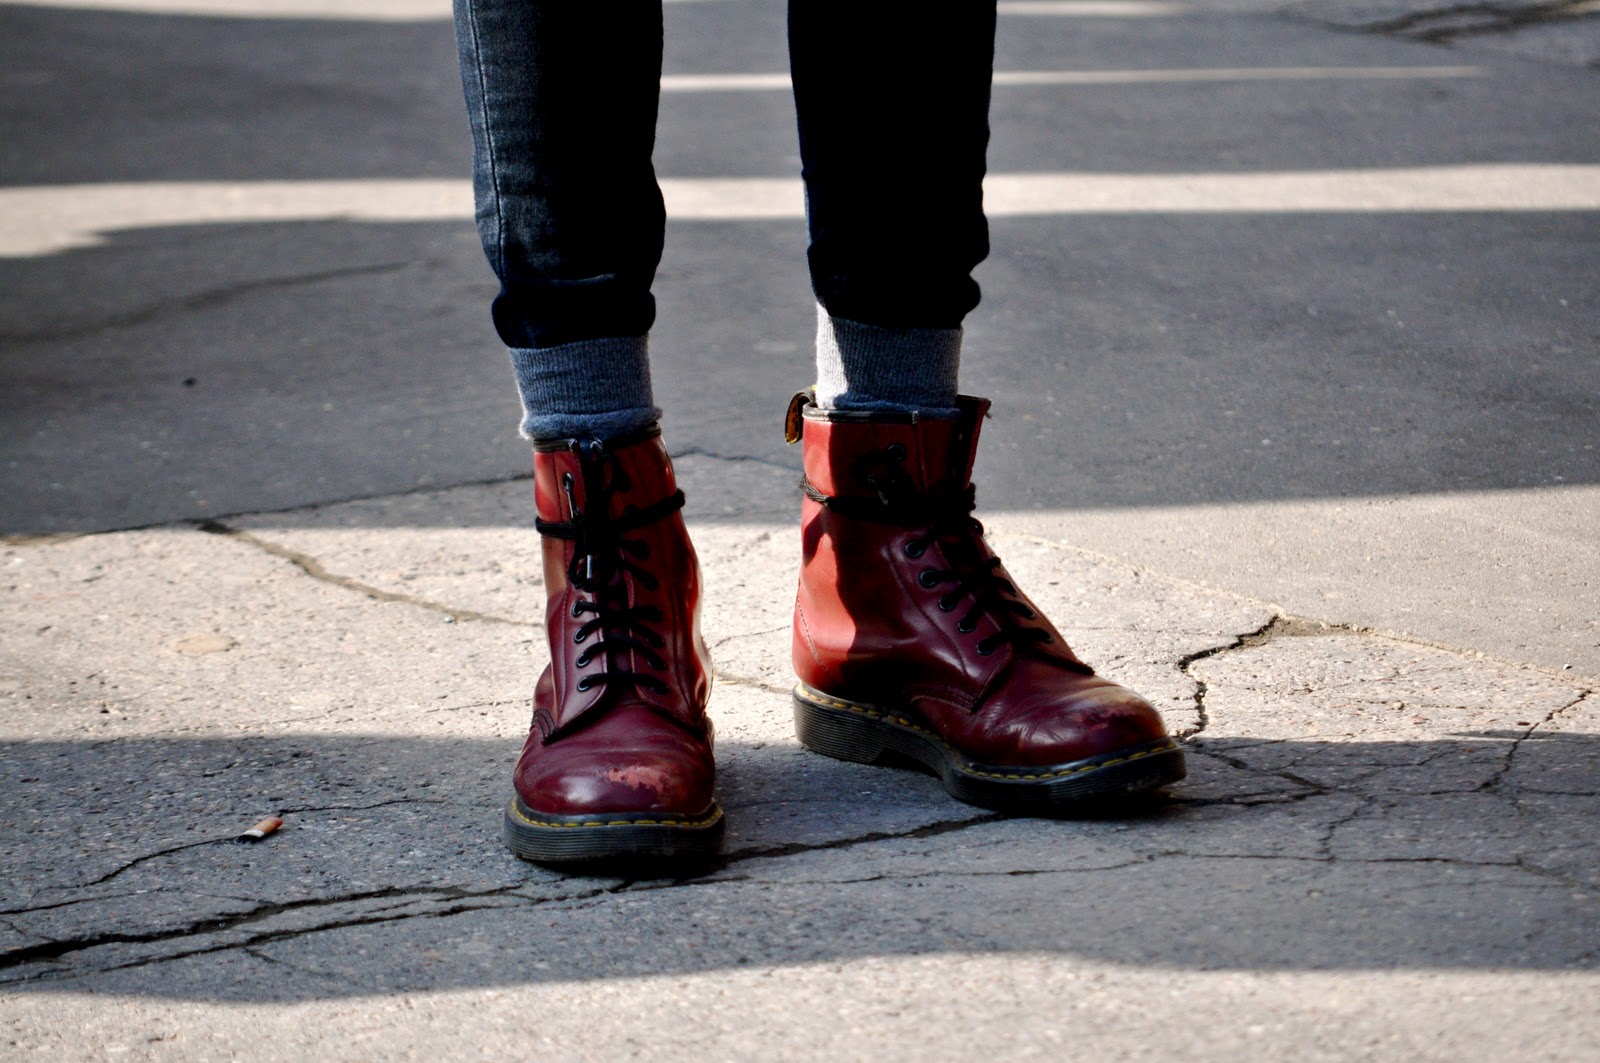 Maroon doc martens are too awesome | Doc martens, Maroon doc martens, Boots